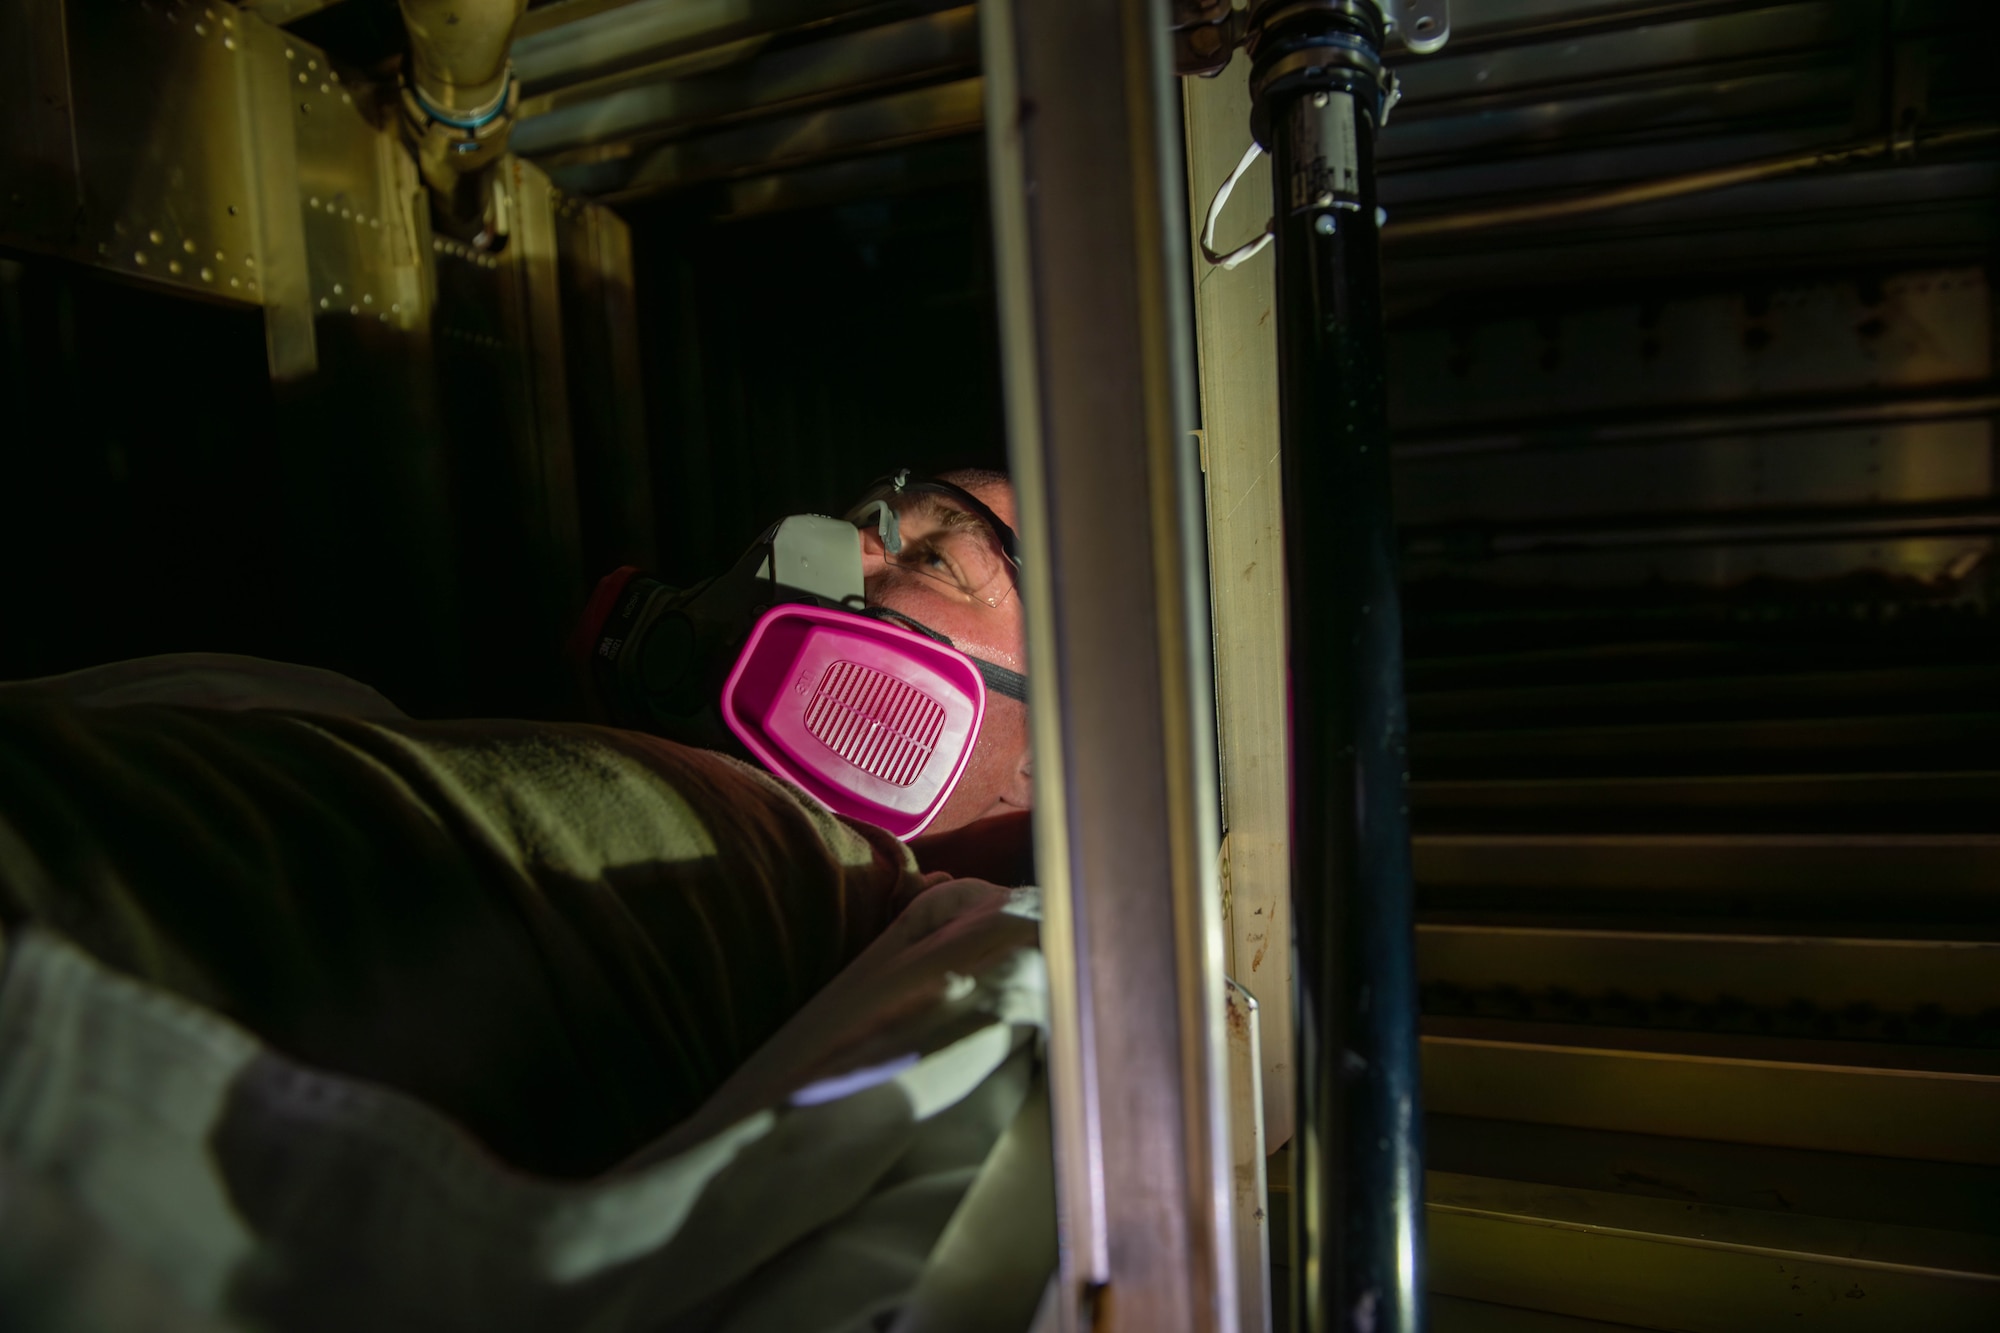 TSgt. Thompson inspecting the inside of a KC-135 fuel tank